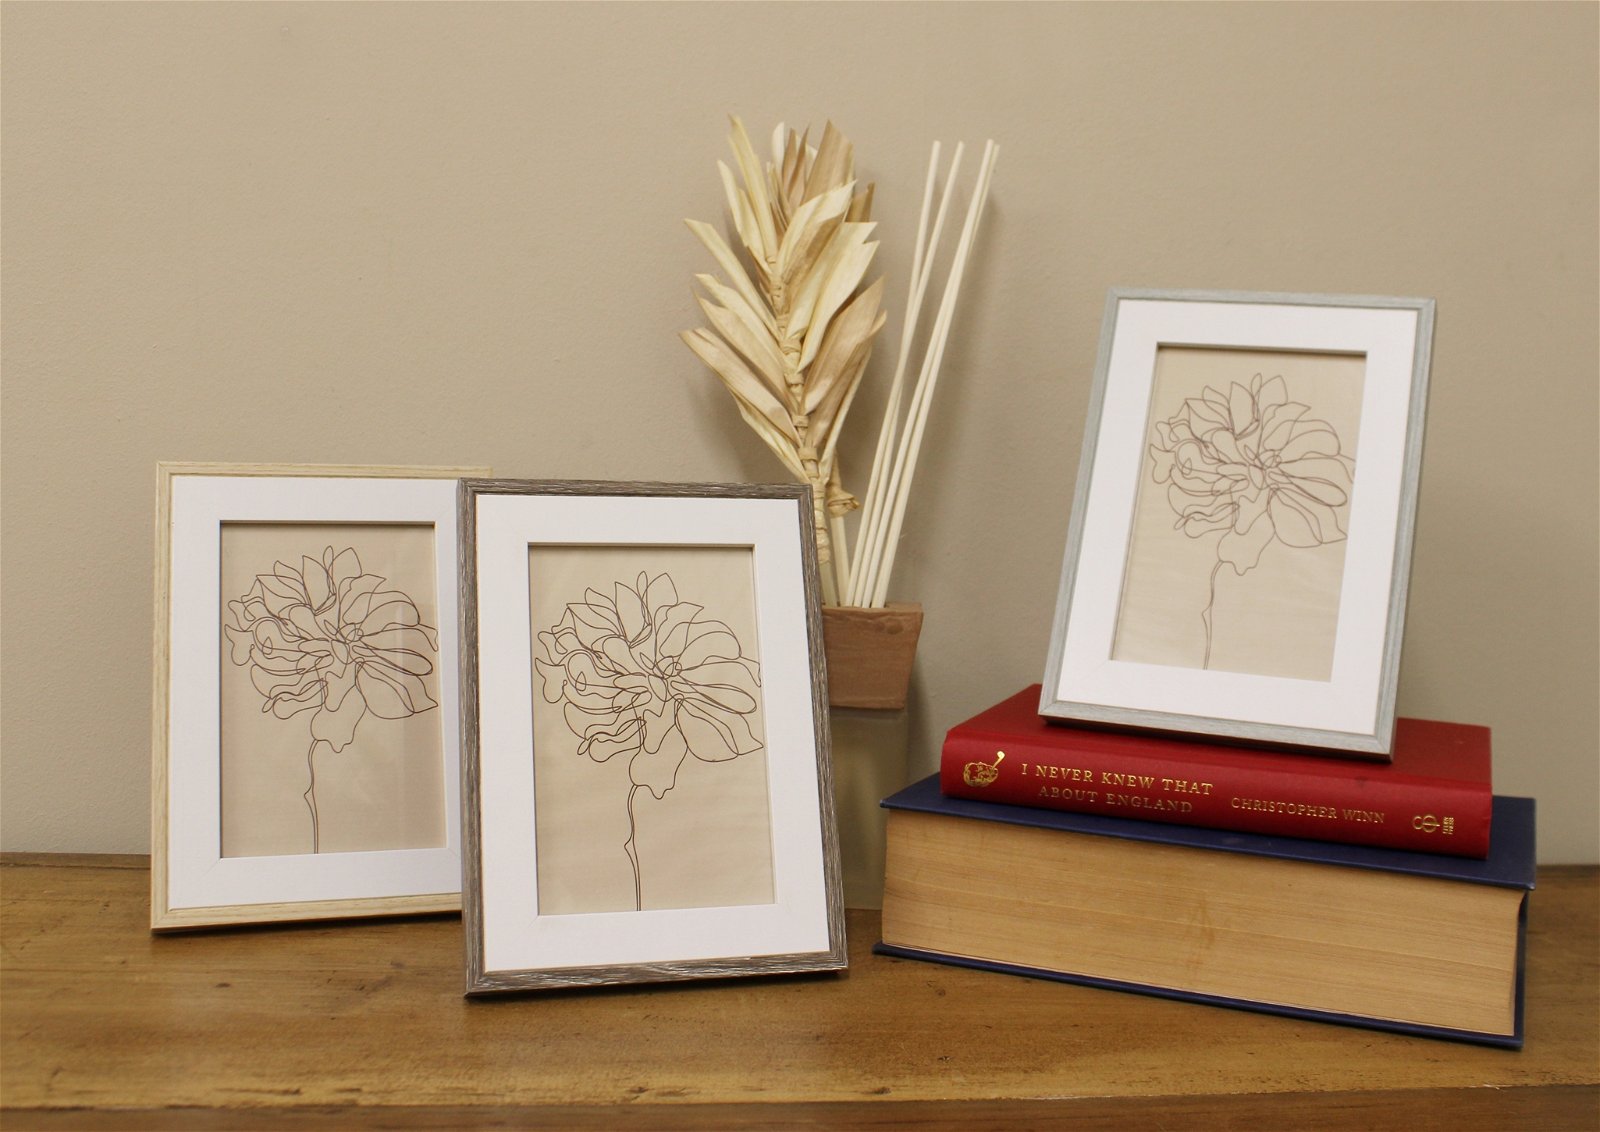 Set of Three Photo Frames with Wood Edge - a Cheeky Plant